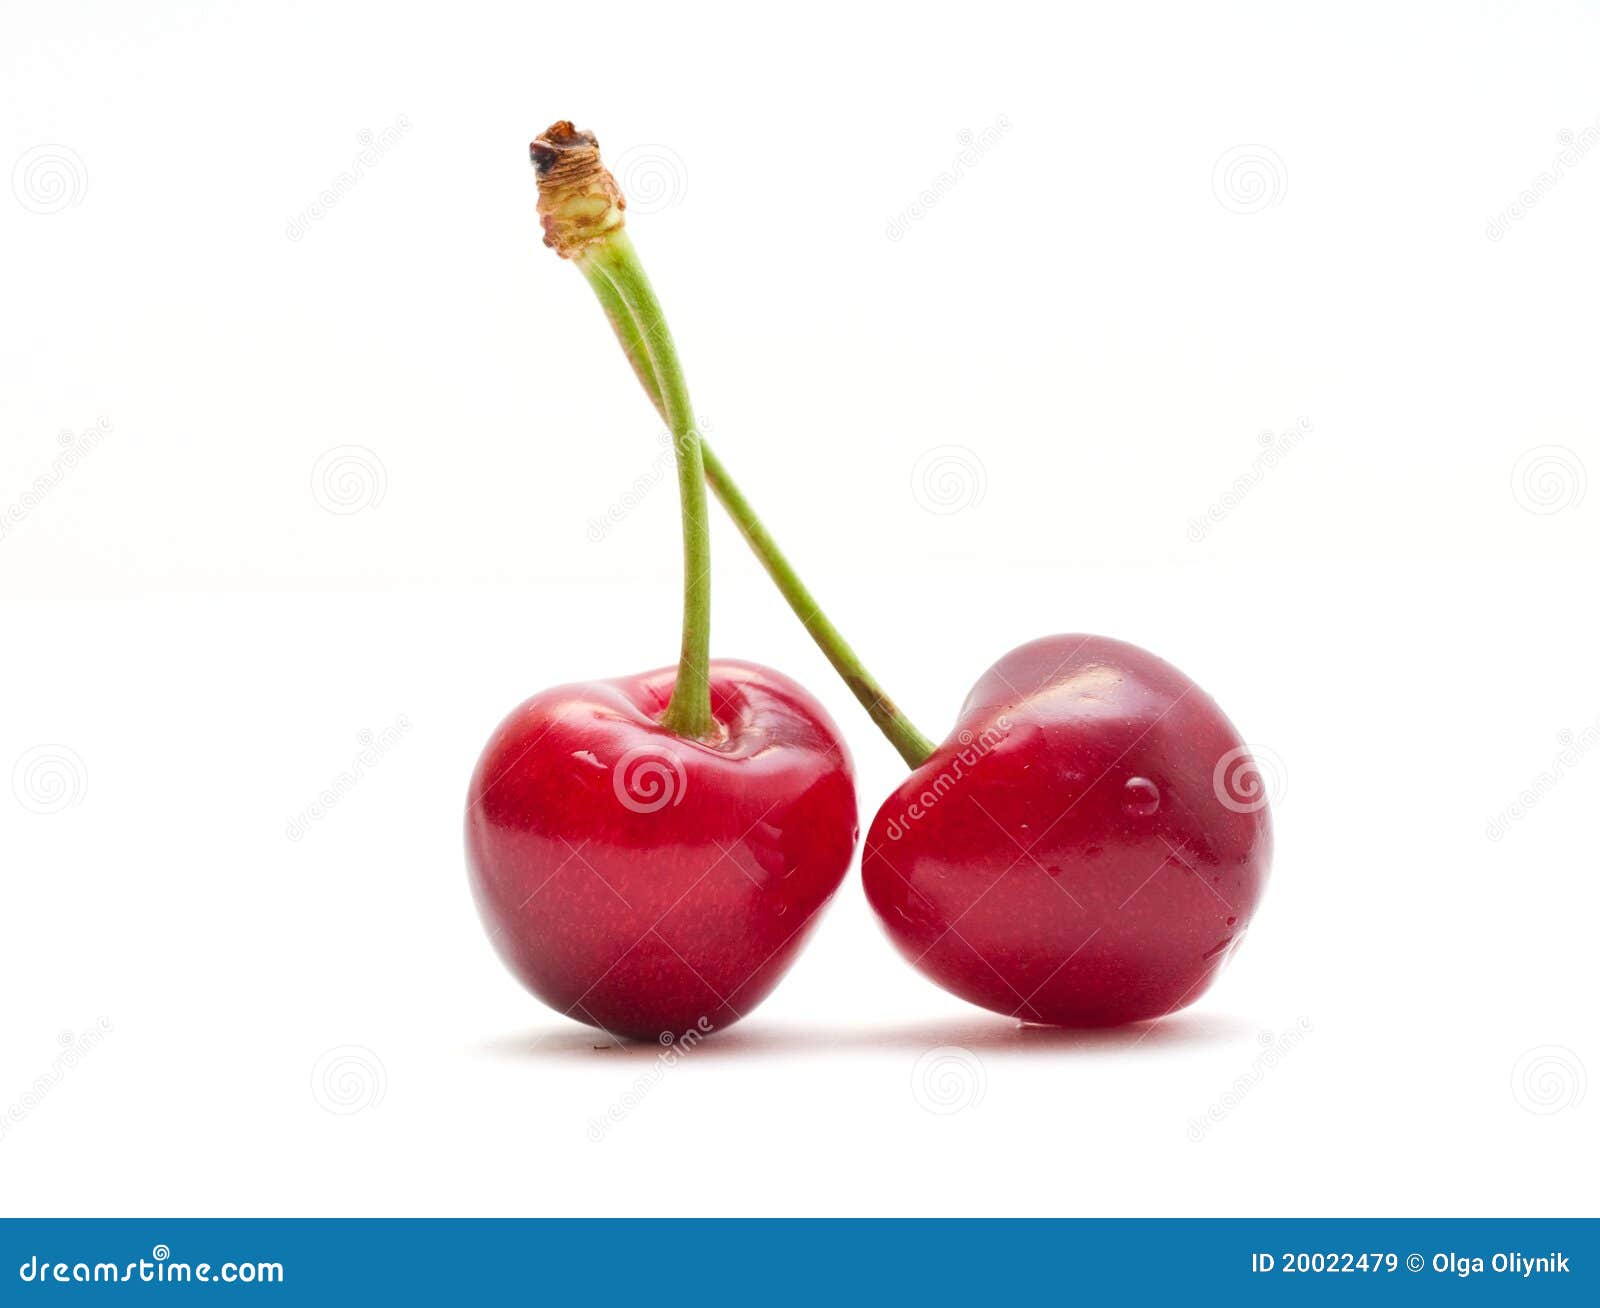 Cherry stock image. Image of acetous, fragrance, frond - 20022479